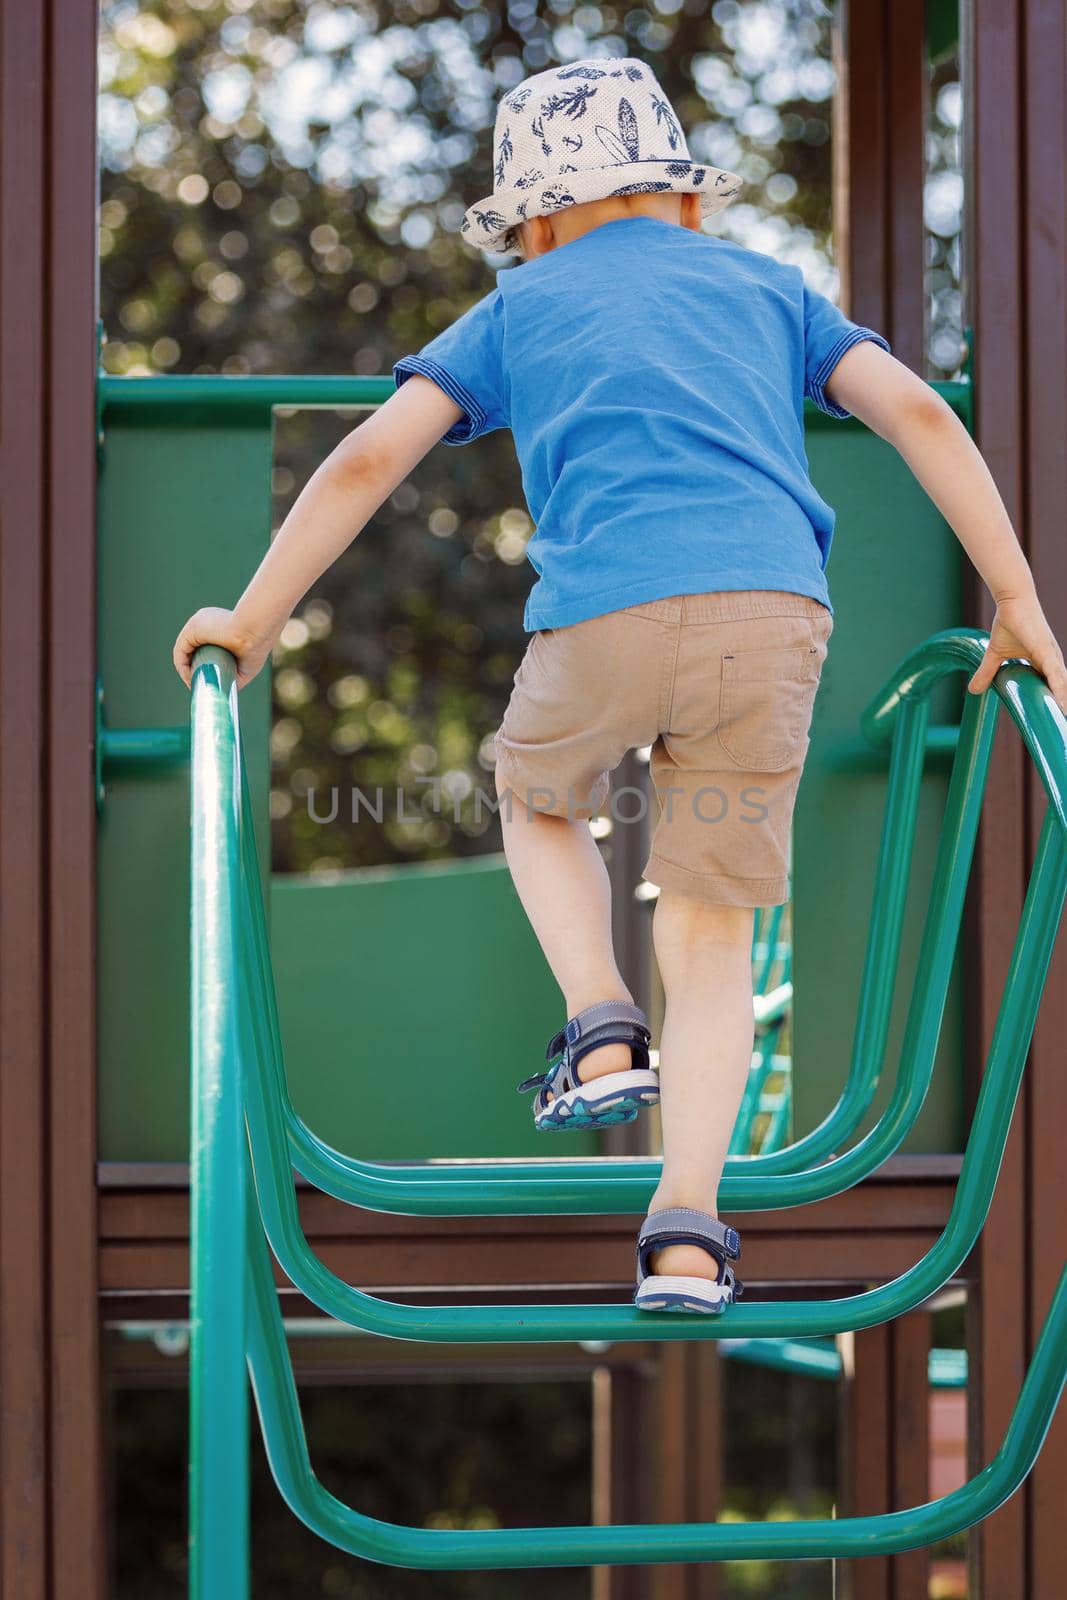 A little boy in a blue T-shirt boldly climbs the playground with a tubular green ladder, the child is not afraid to take risks. Rear view photo.